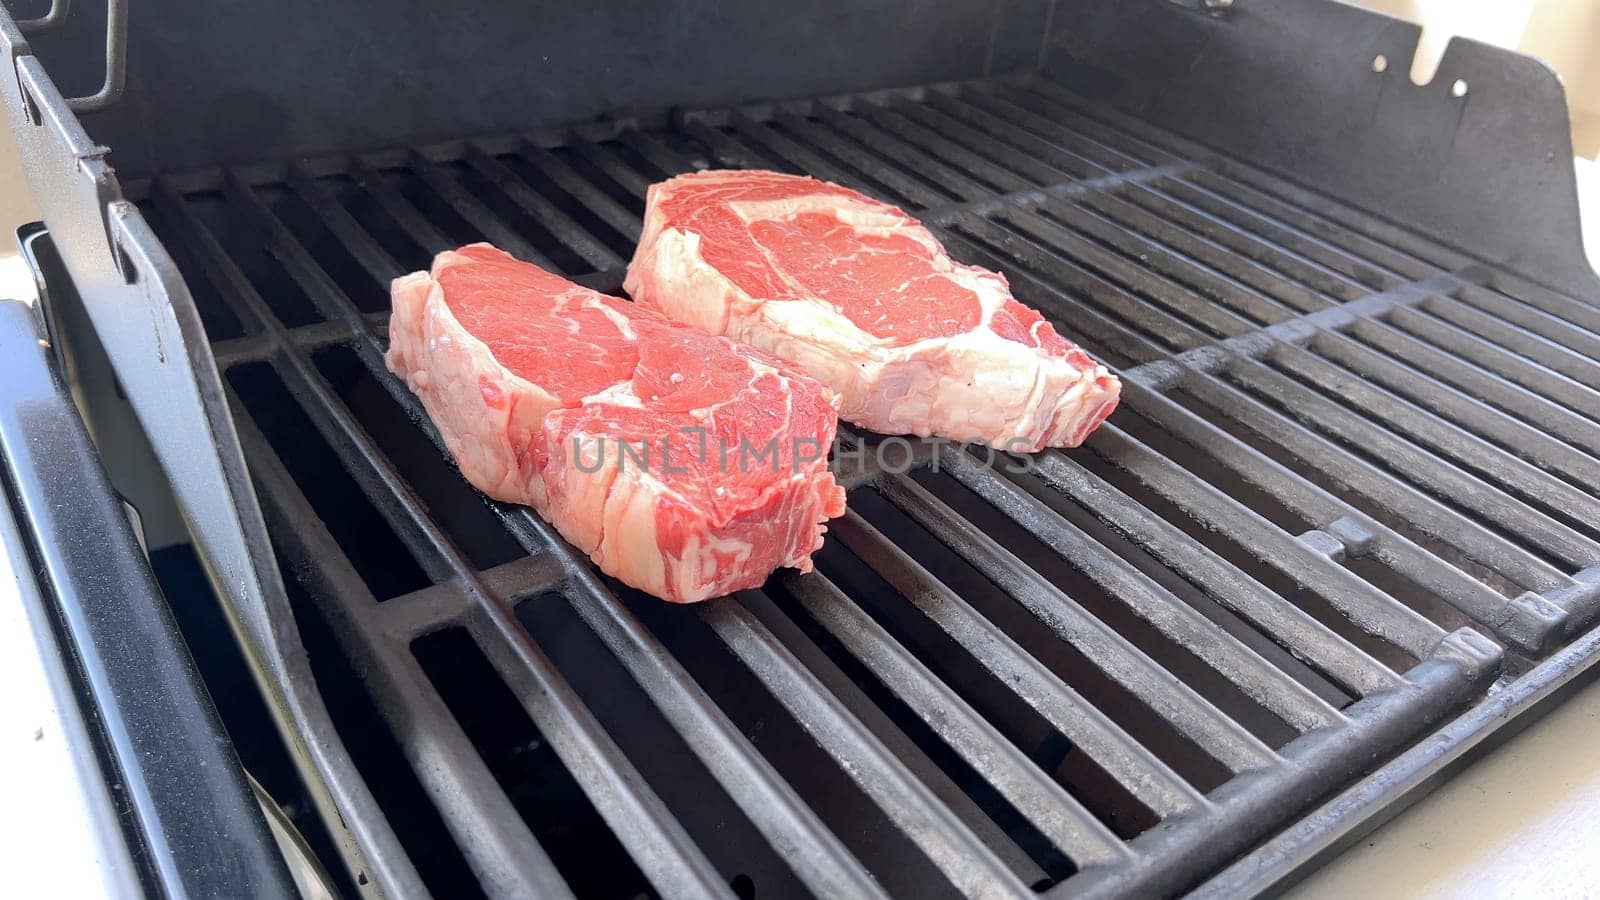 Grilling Thick Steaks on an Outdoor Barbecue Grill by arinahabich